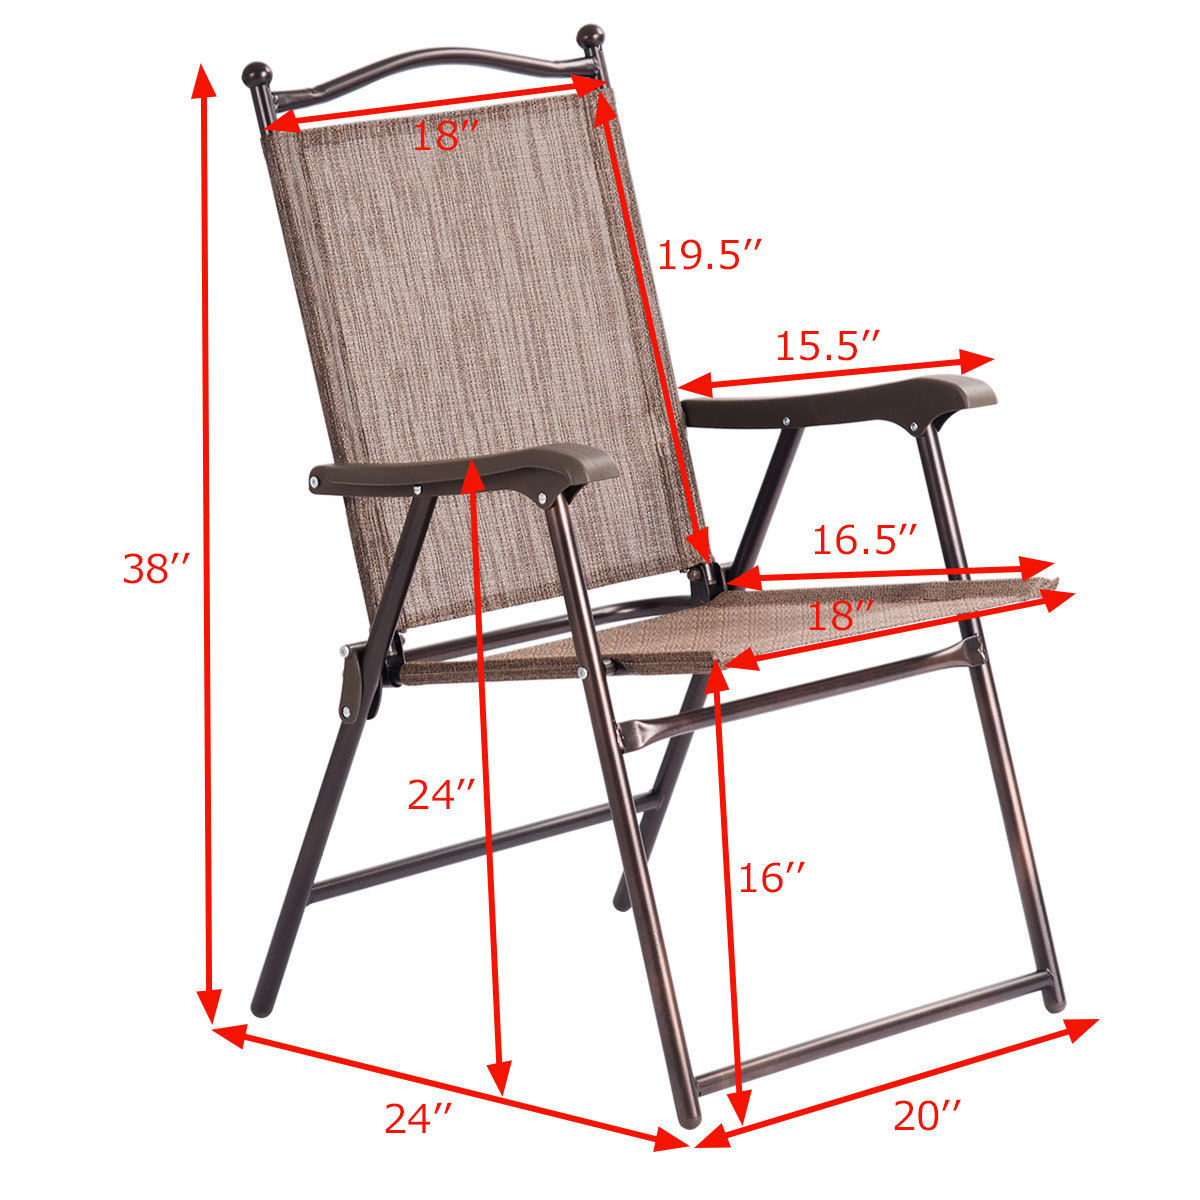 Costway Set of 2 Patio Folding Sling Back Chairs Camping Deck Garden Beach Brown - image 2 of 9